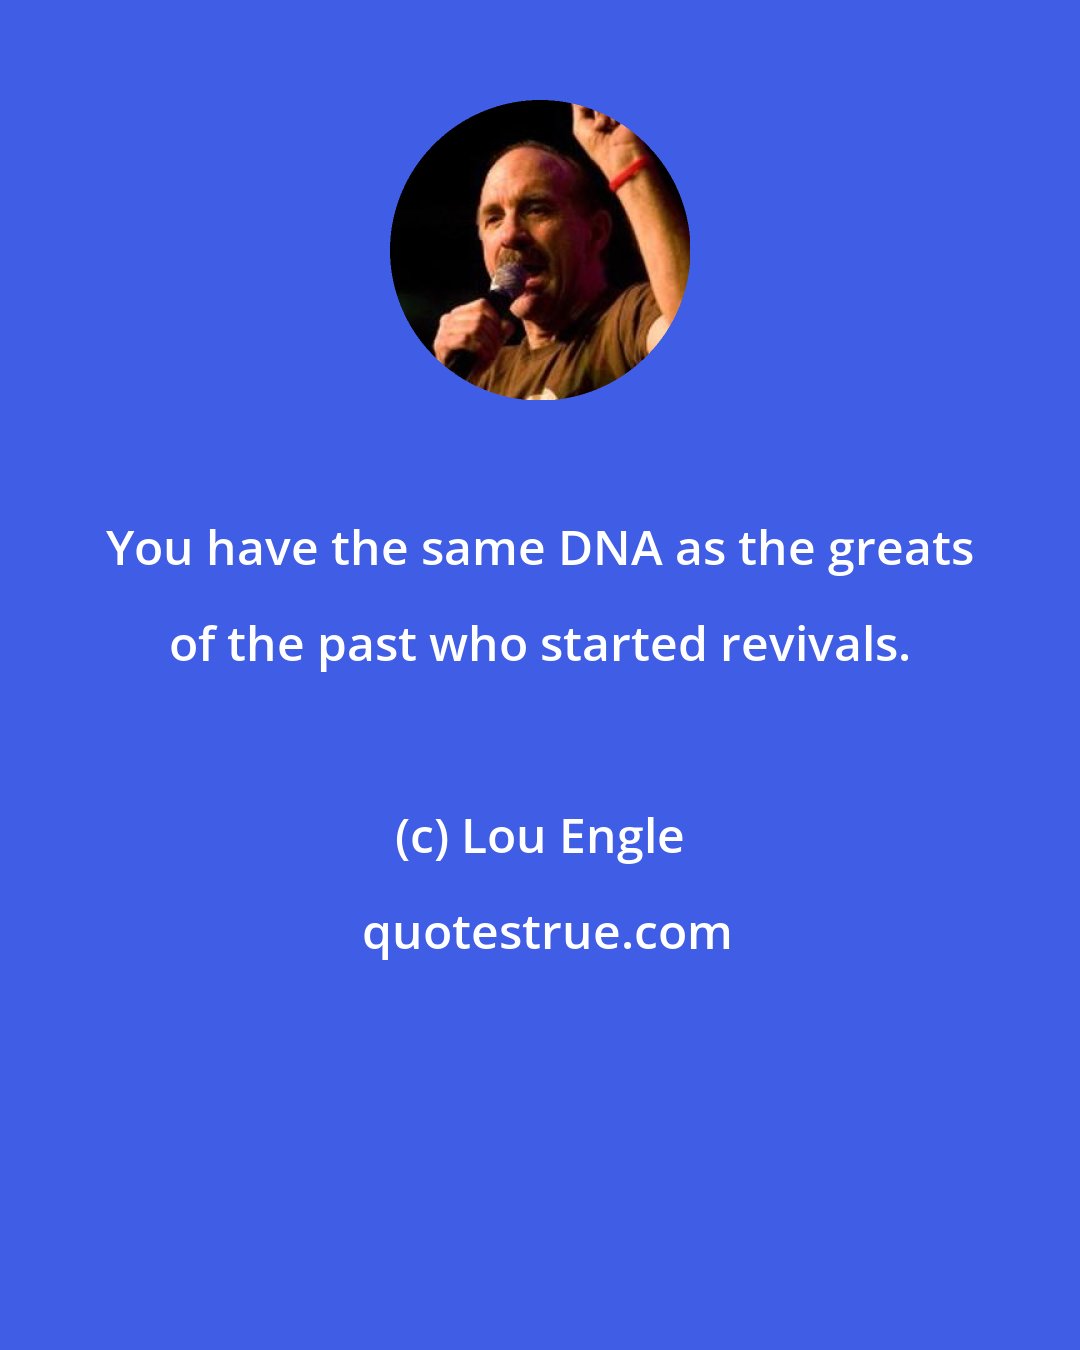 Lou Engle: You have the same DNA as the greats of the past who started revivals.